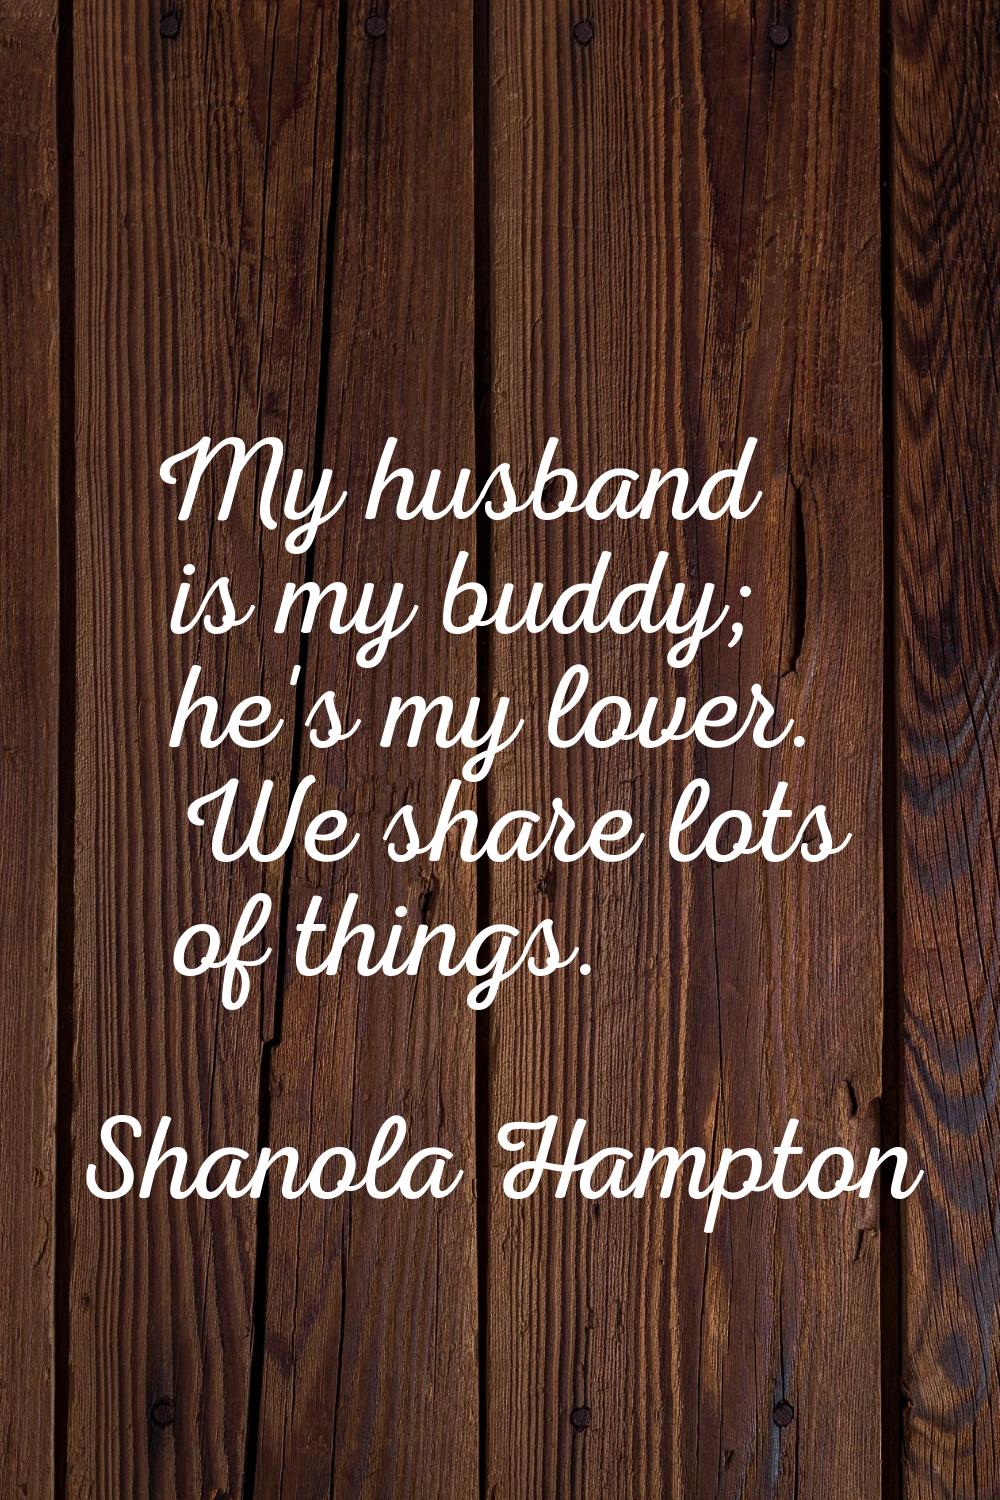 My husband is my buddy; he's my lover. We share lots of things.